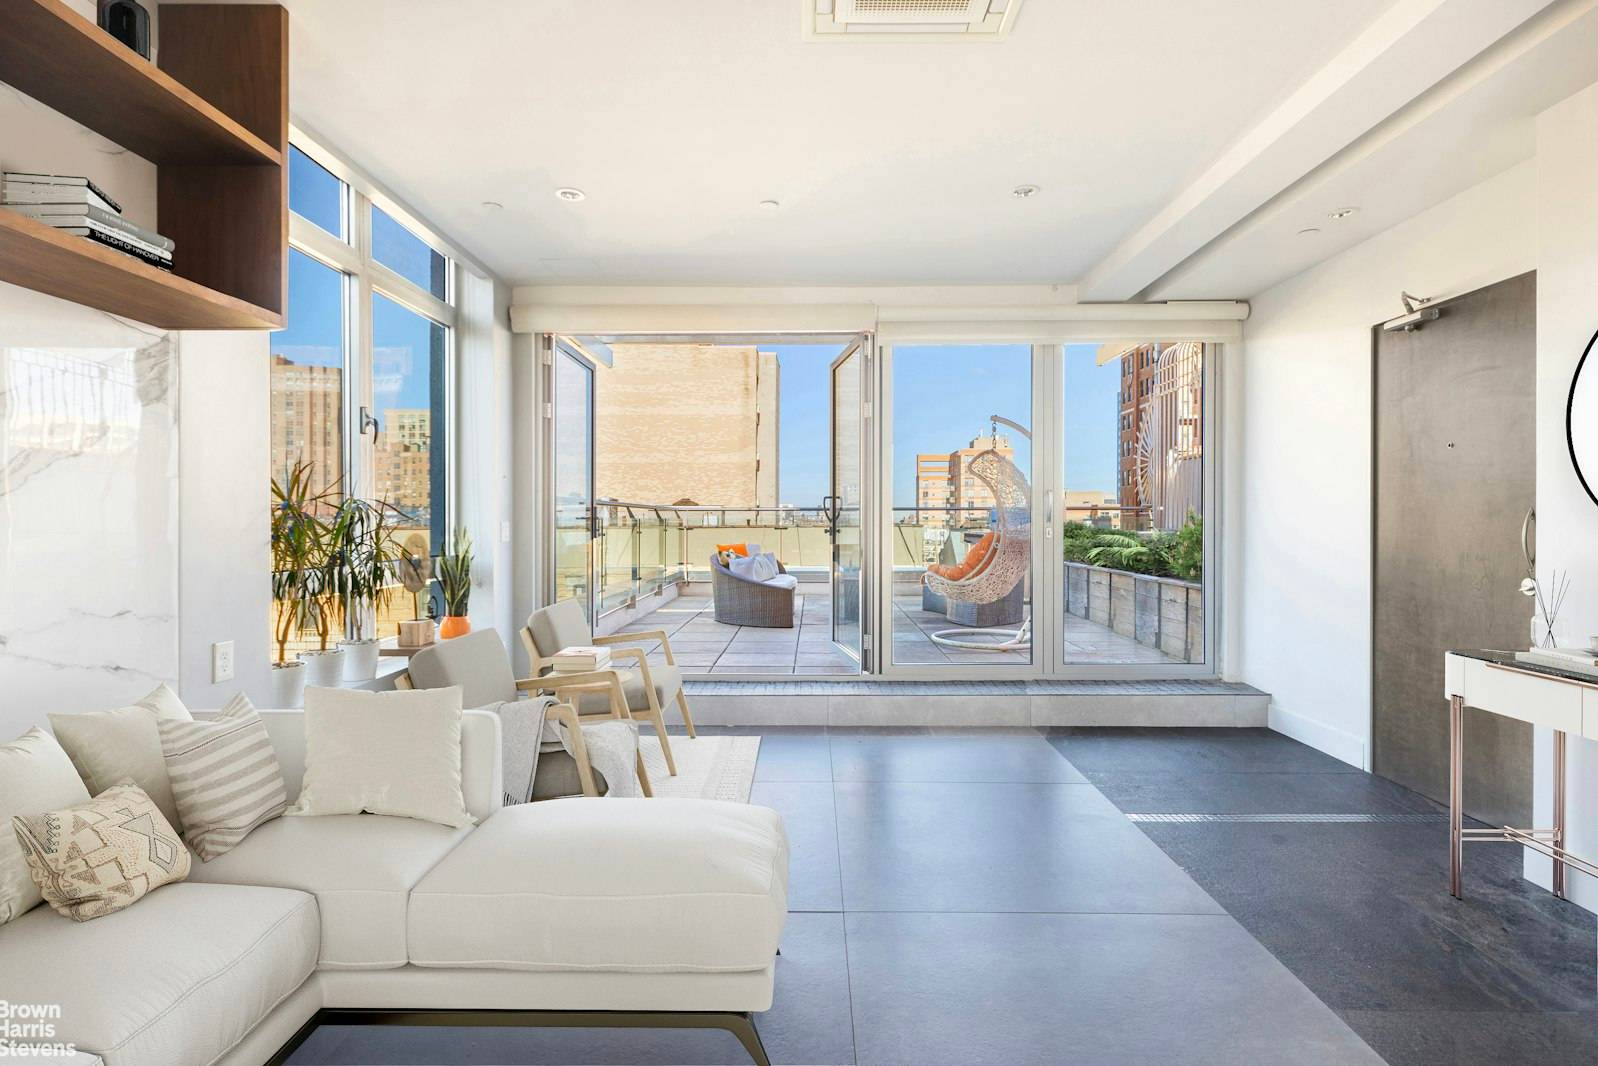 STUNNING PENTHOUSE DUPLEX WITH ROOF TERRACEAvailable for the first time, encompassing over 2, 500 square feet of interior space and 540 square feet of private terrace, this sprawling four bedroom ...